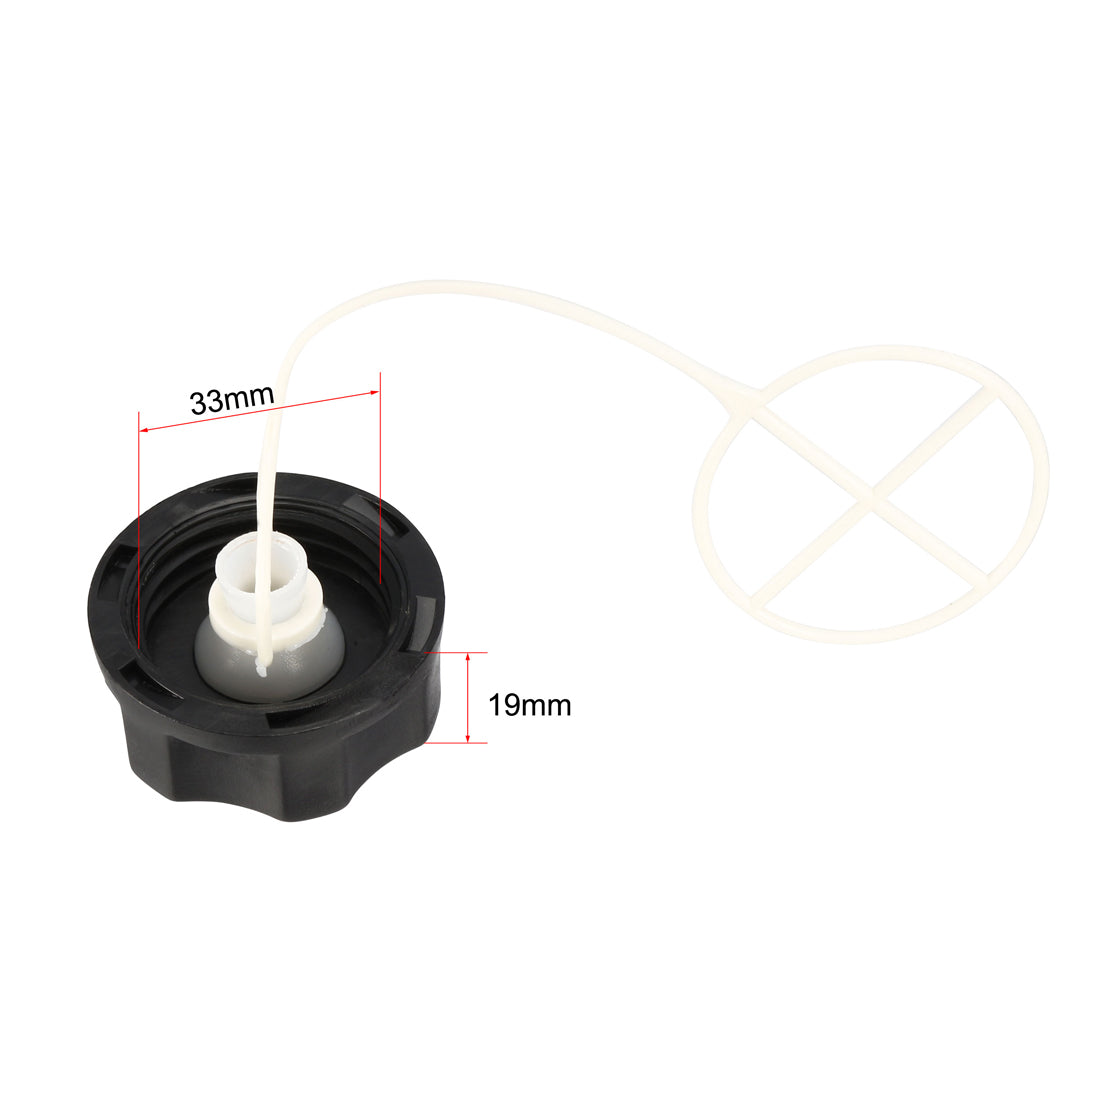 uxcell Uxcell Fuel Tank Cap Fit for 43CC 52CC CG430 CG520 BC430 BC520 TL43 TL52 Engine Motor Grass Trimmer